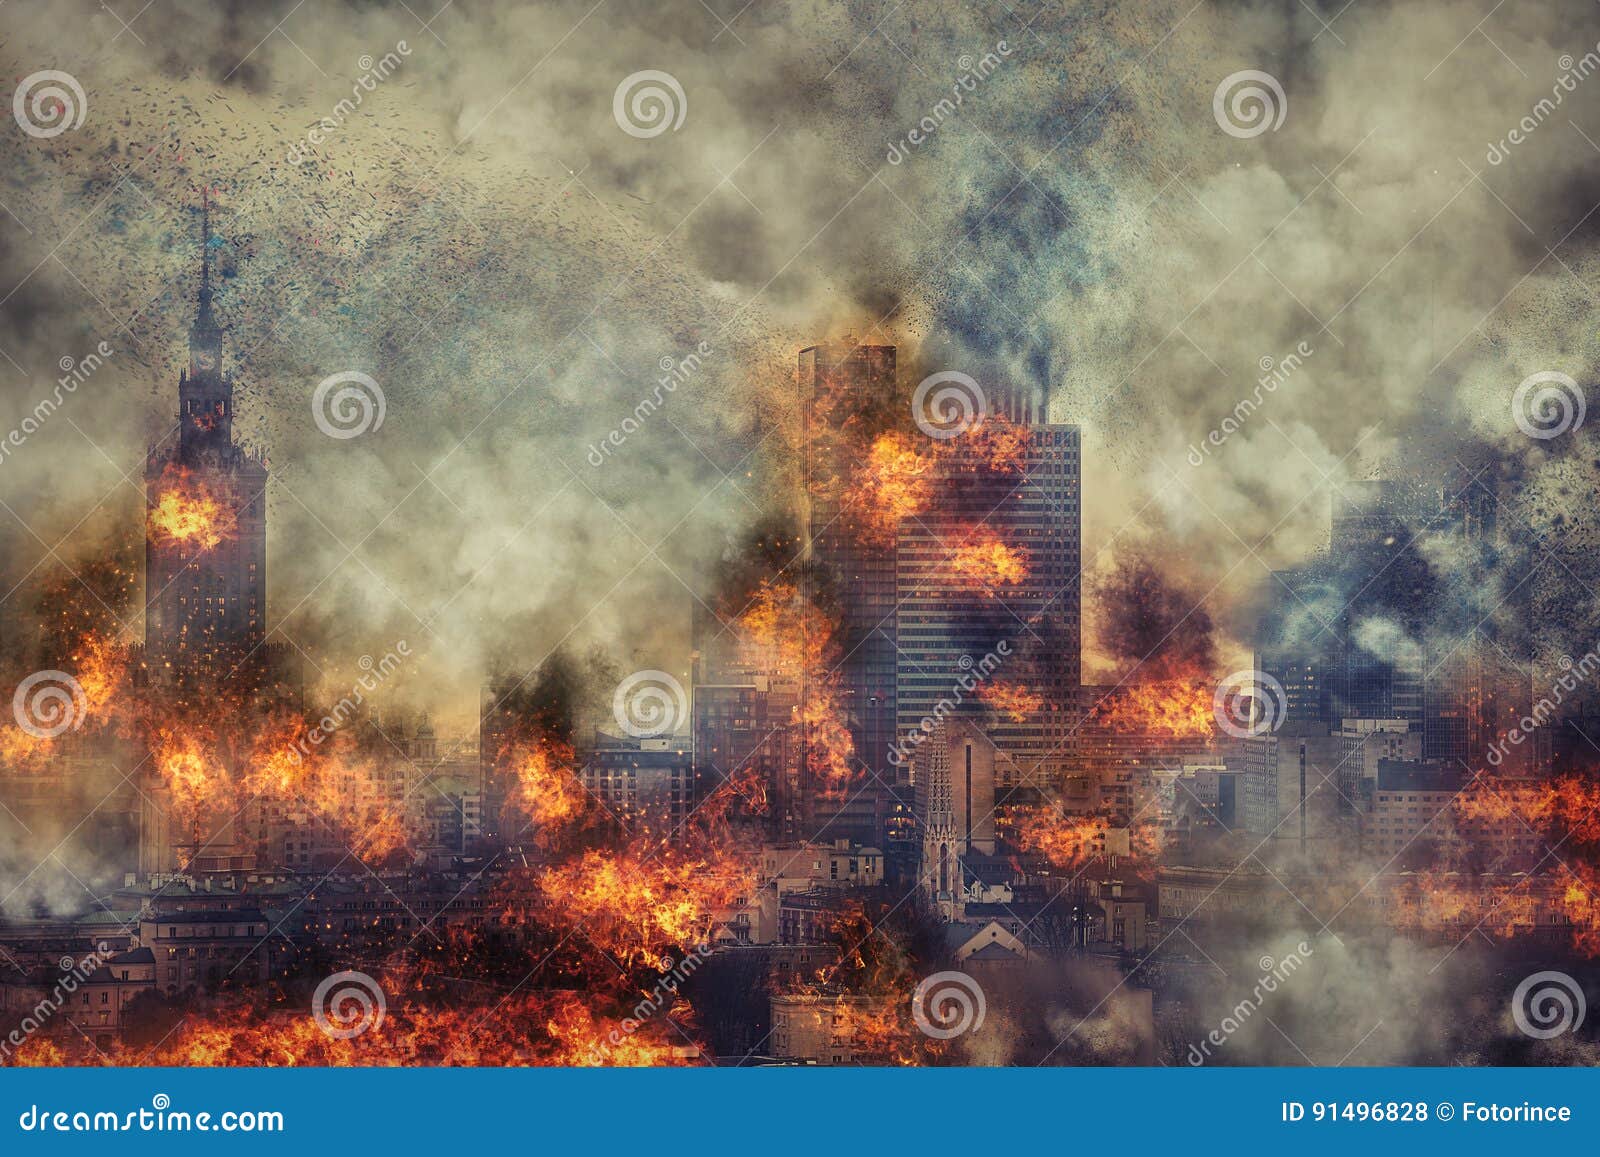 apocalypse. burning city, abstract vision.